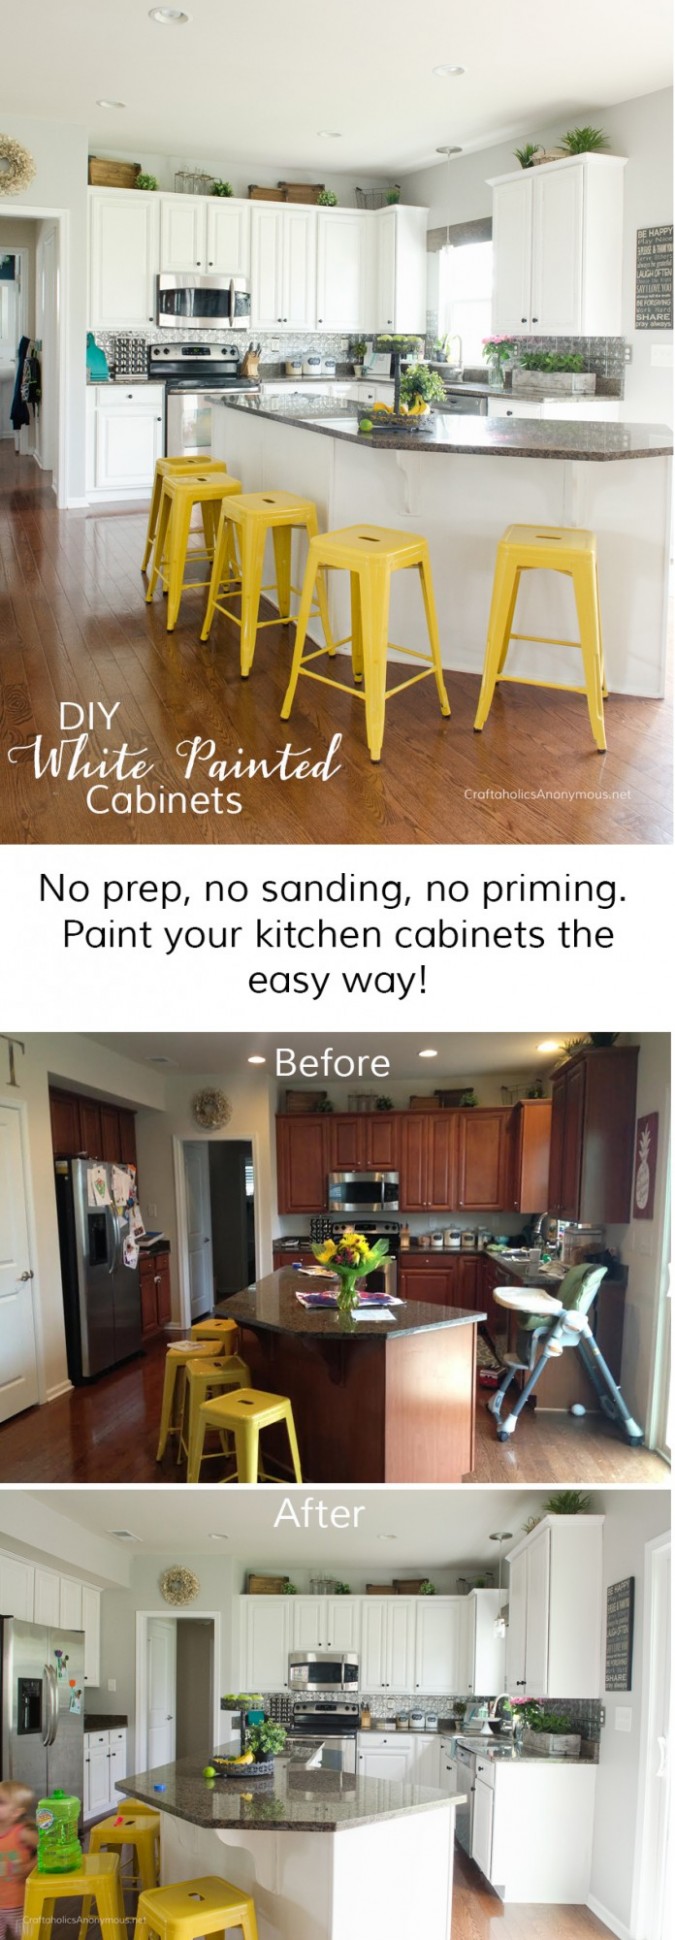 Craftaholics Anonymous® | How To Paint Kitchen Cabinets ..